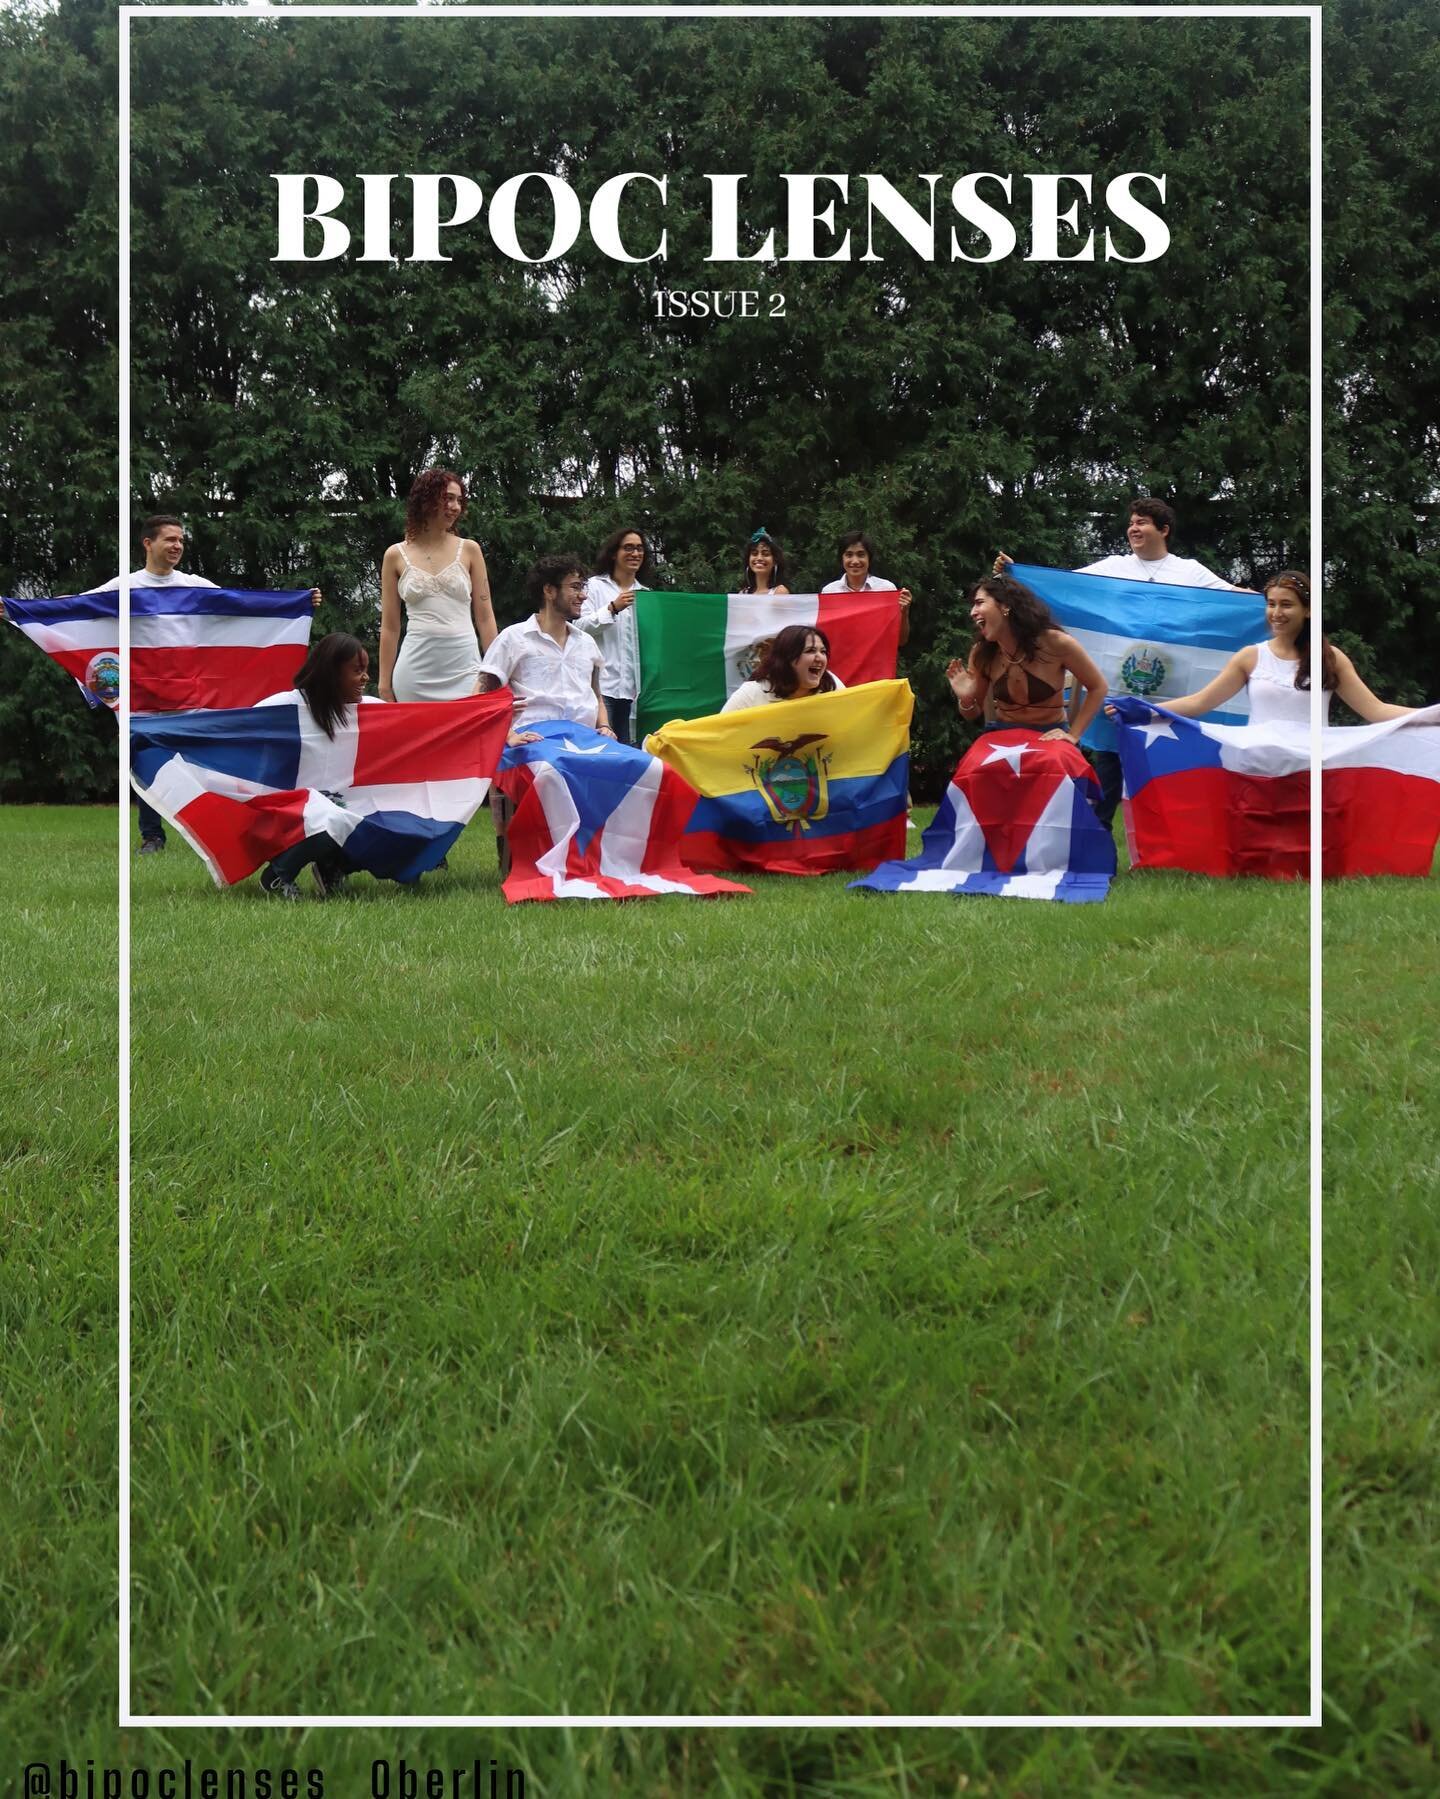 BIPOC LENSES LatinX Issue
✨COMING OCTOBER 3✨